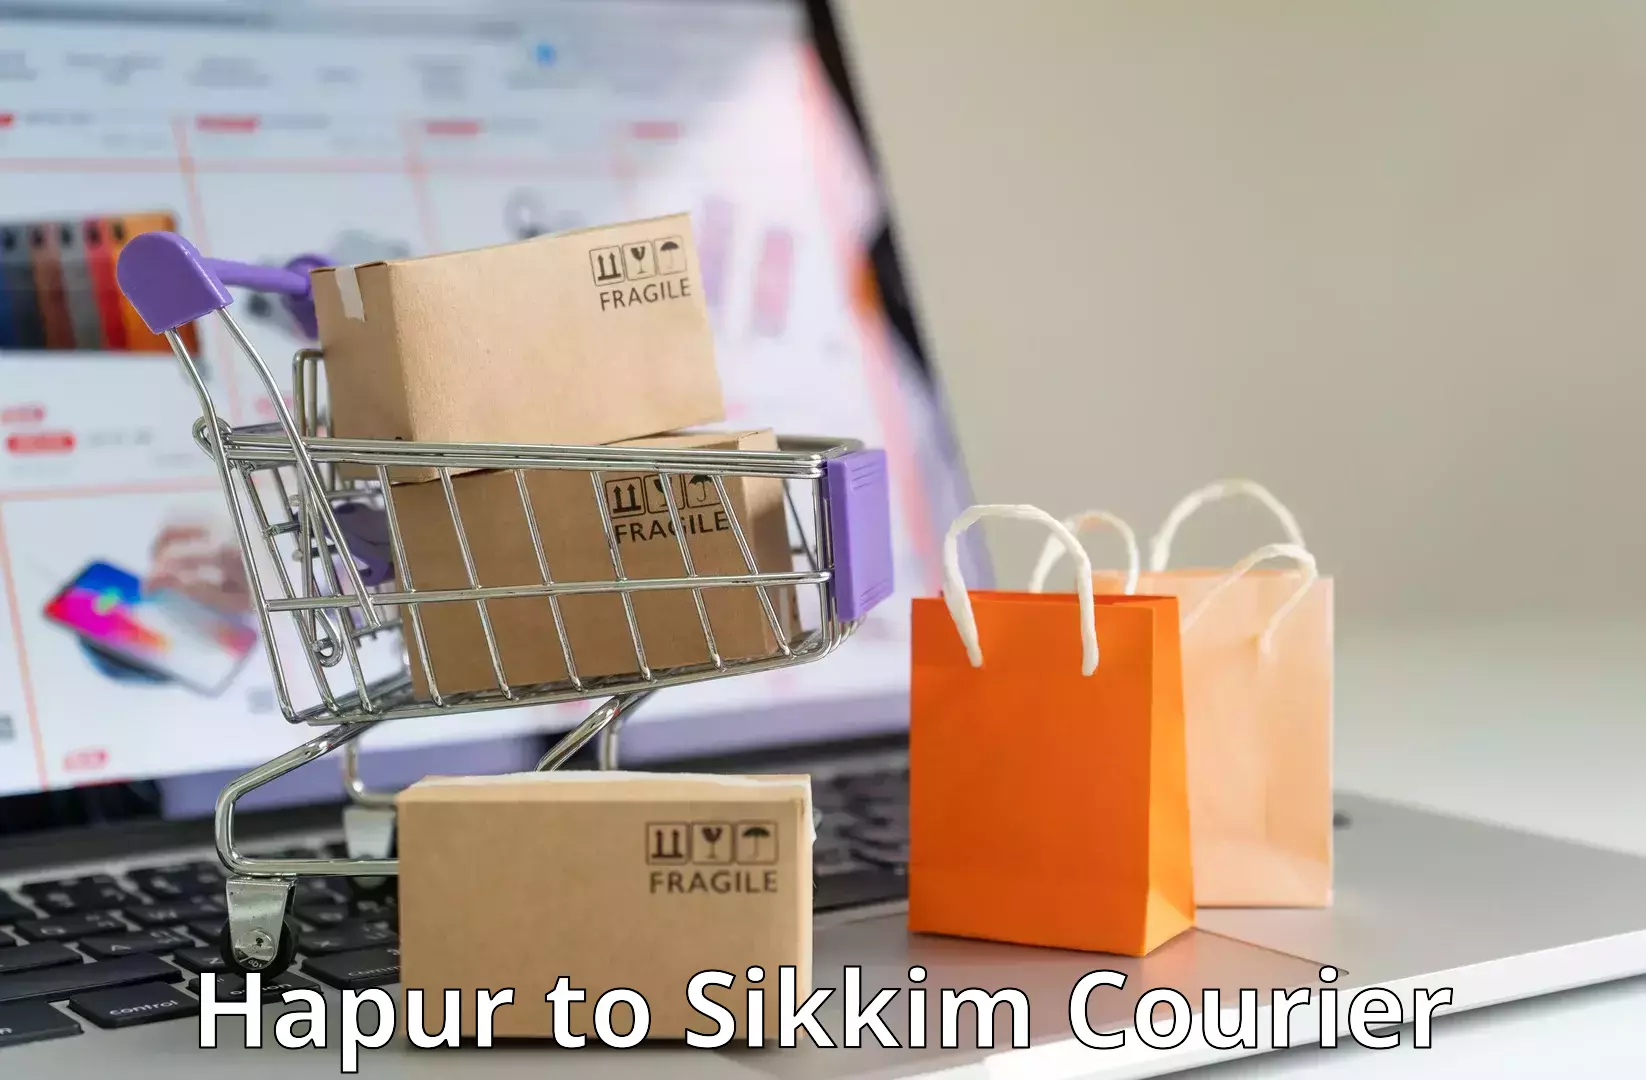 Local delivery service Hapur to East Sikkim